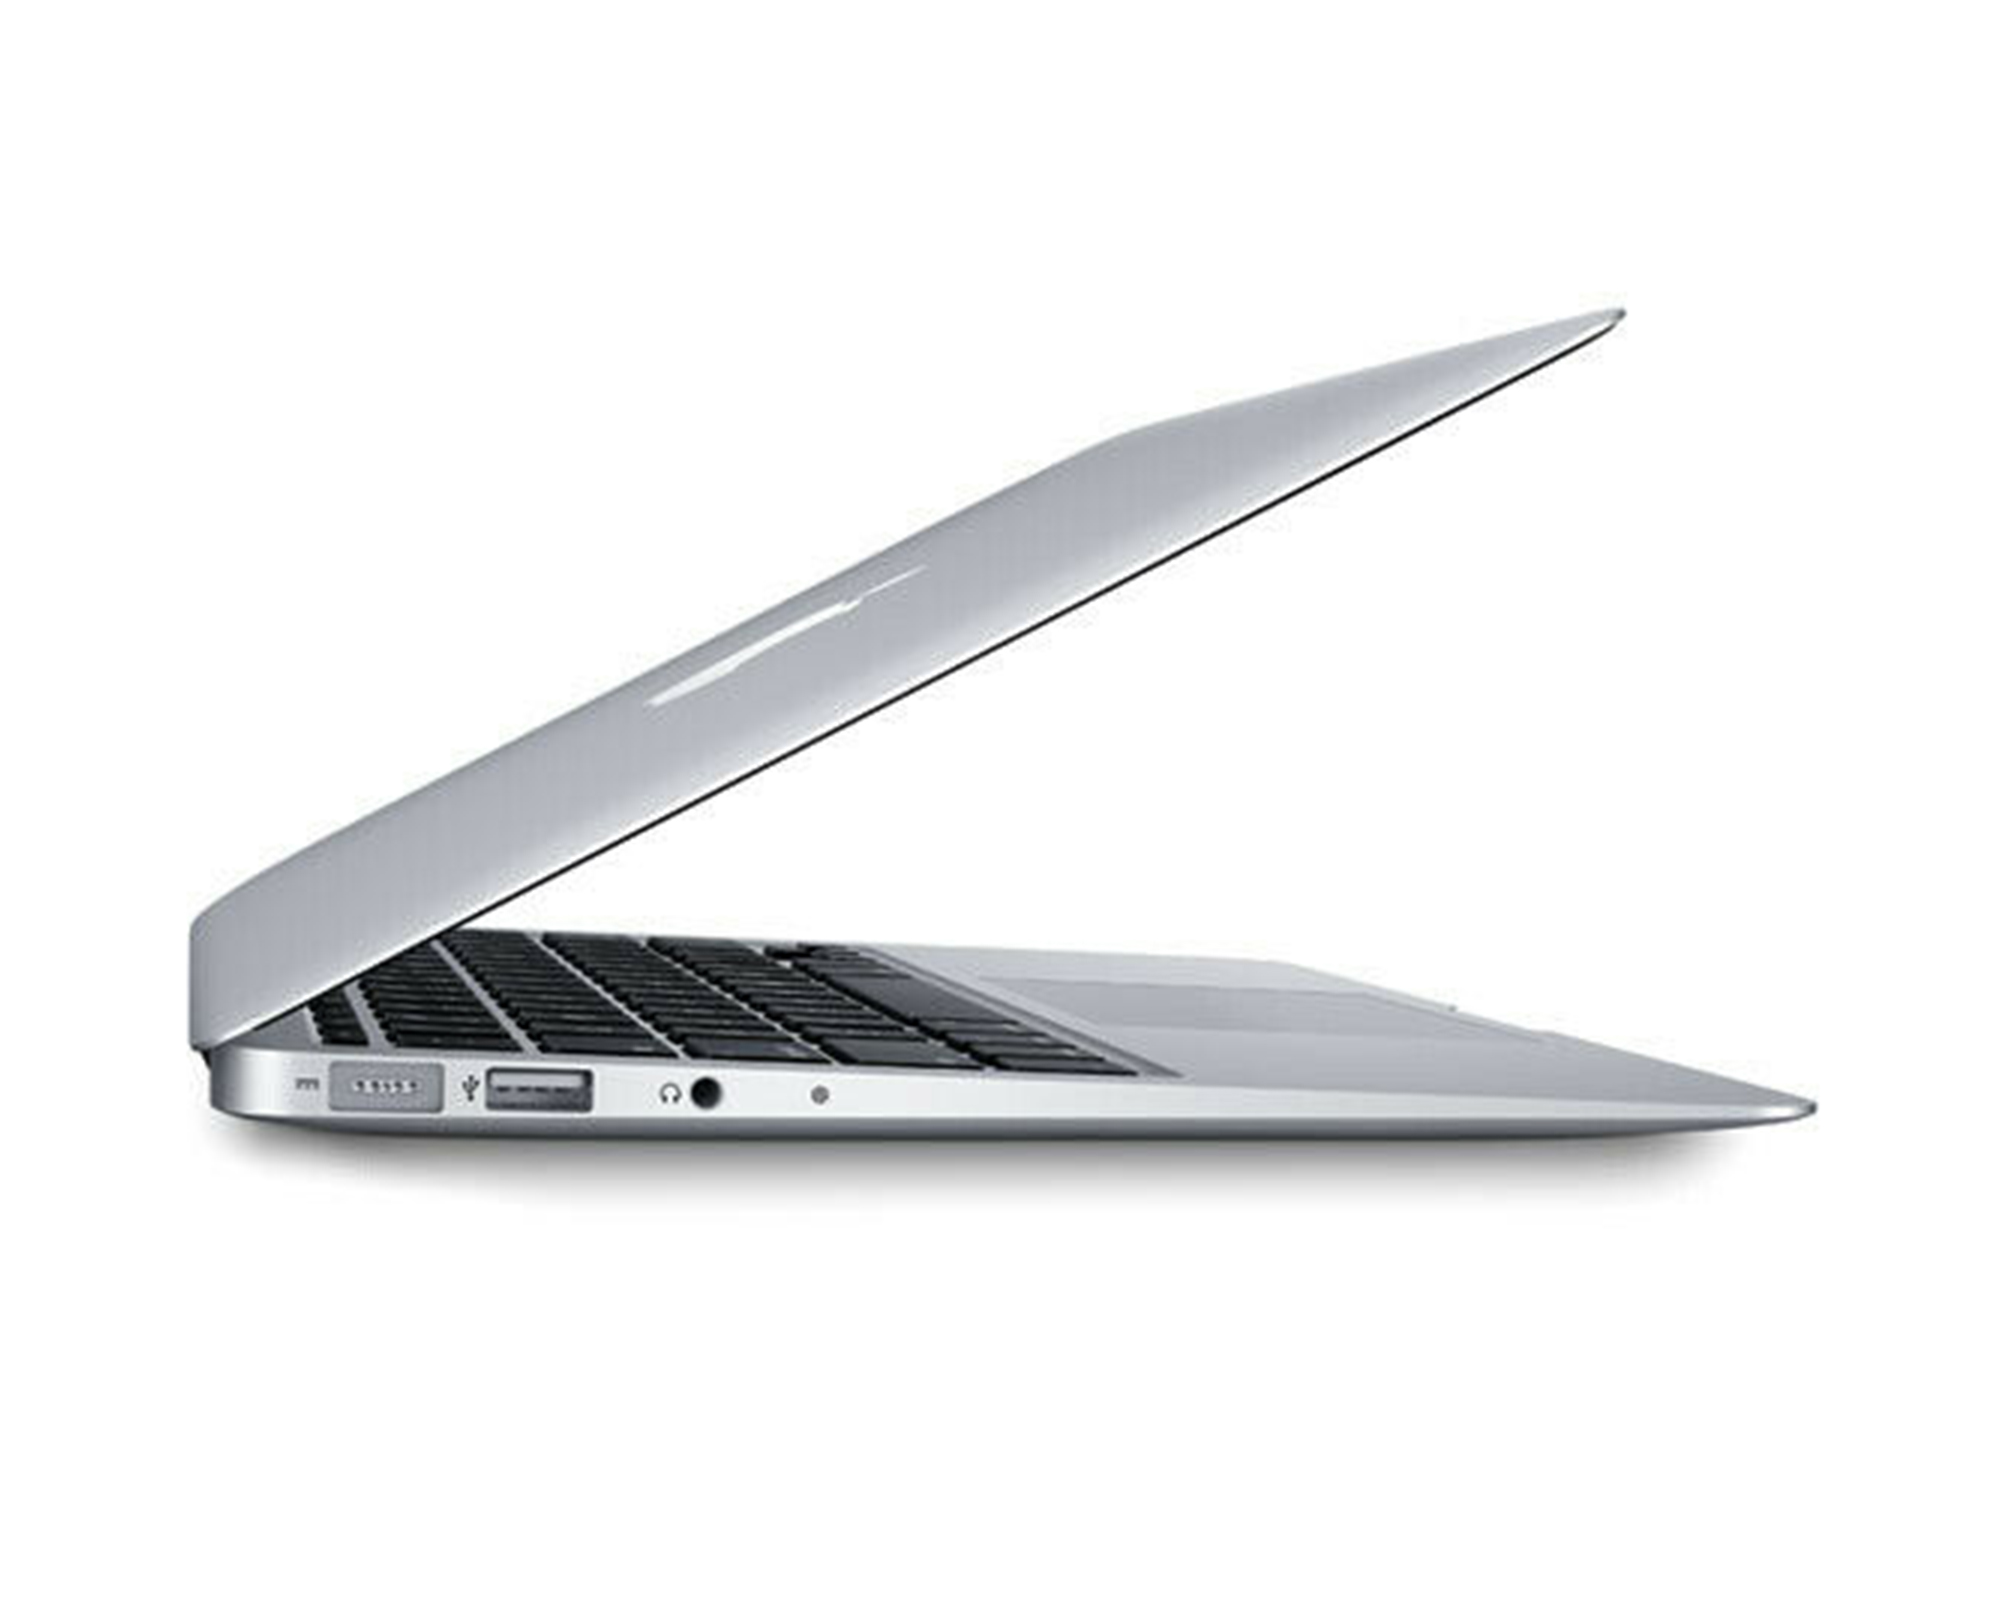 Restored 13" Apple MacBook Air 1.8GHz Dual Core i5 4GB Memory / 256GB SSD (Turbo Boost to 2.8GHz) (Refurbished) - image 5 of 5